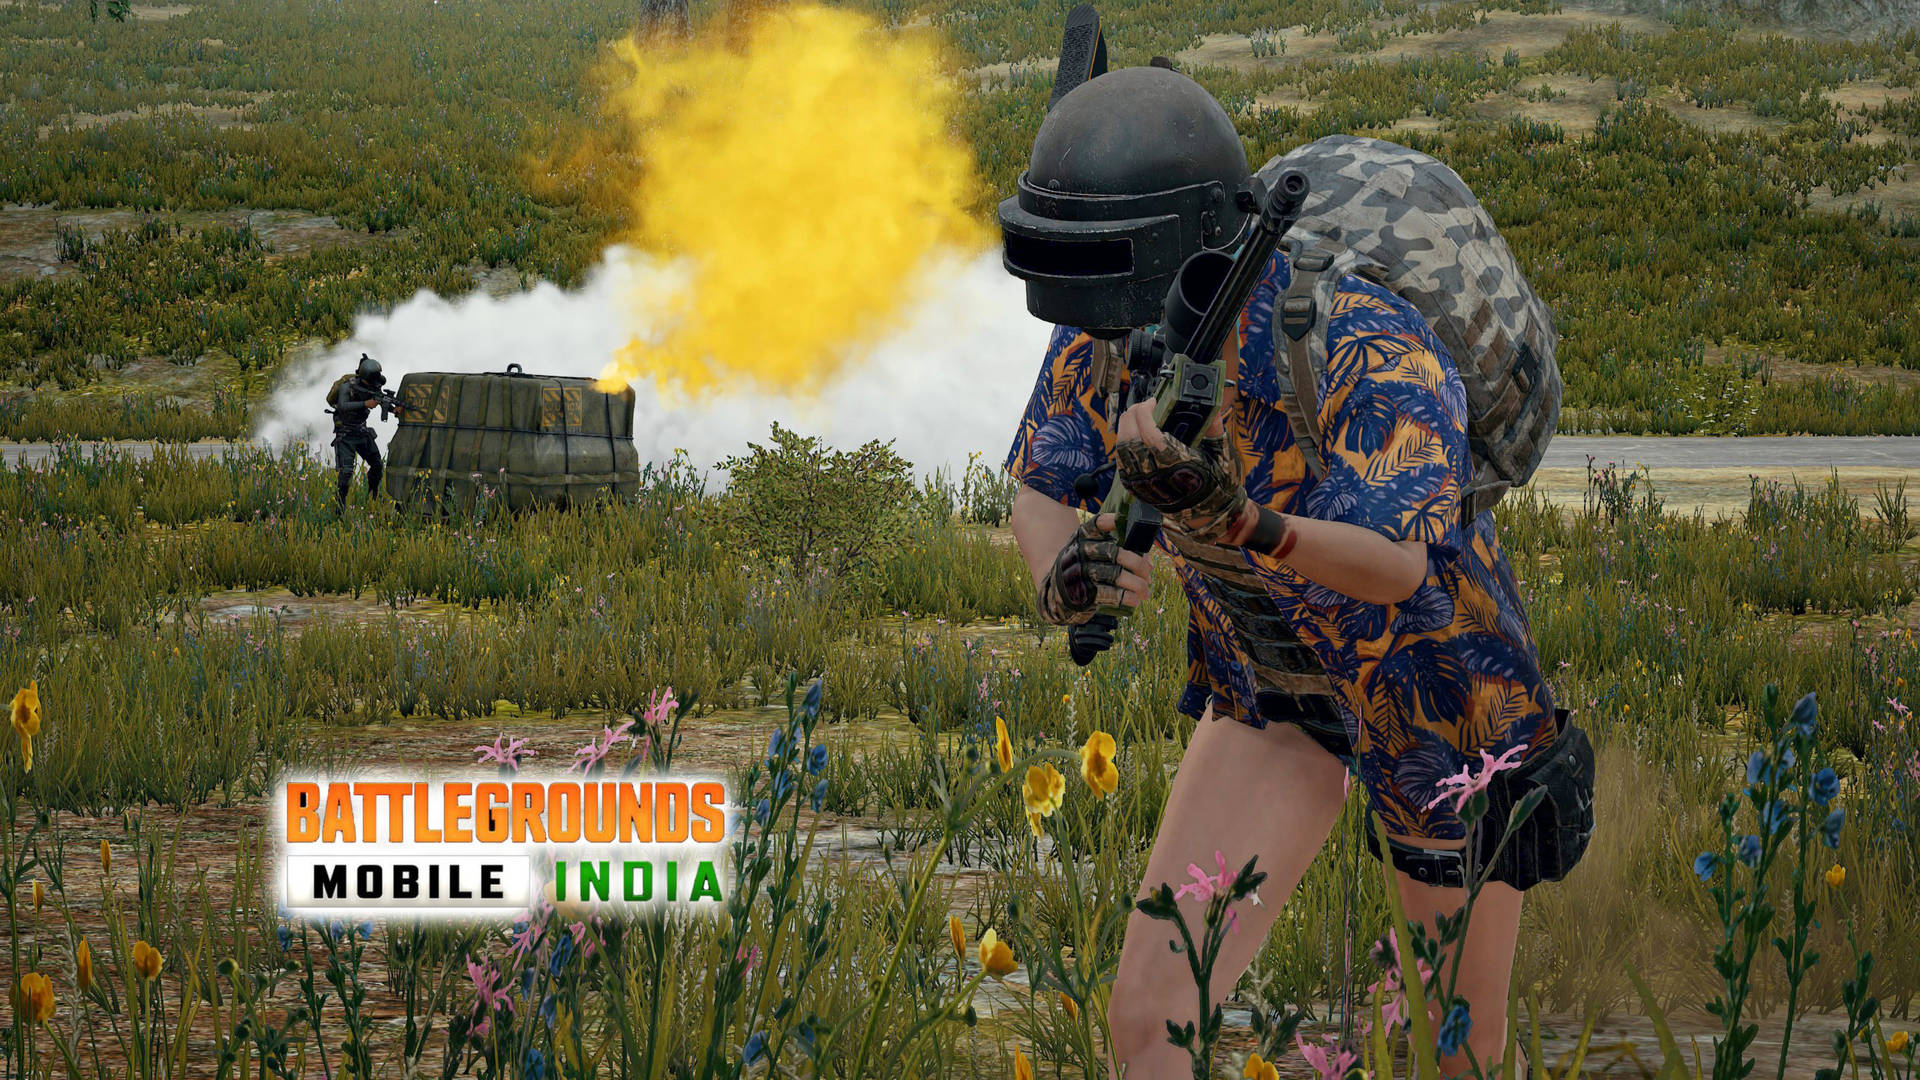 40+ Battlegrounds Mobile India Wallpapers for PC & Mobile